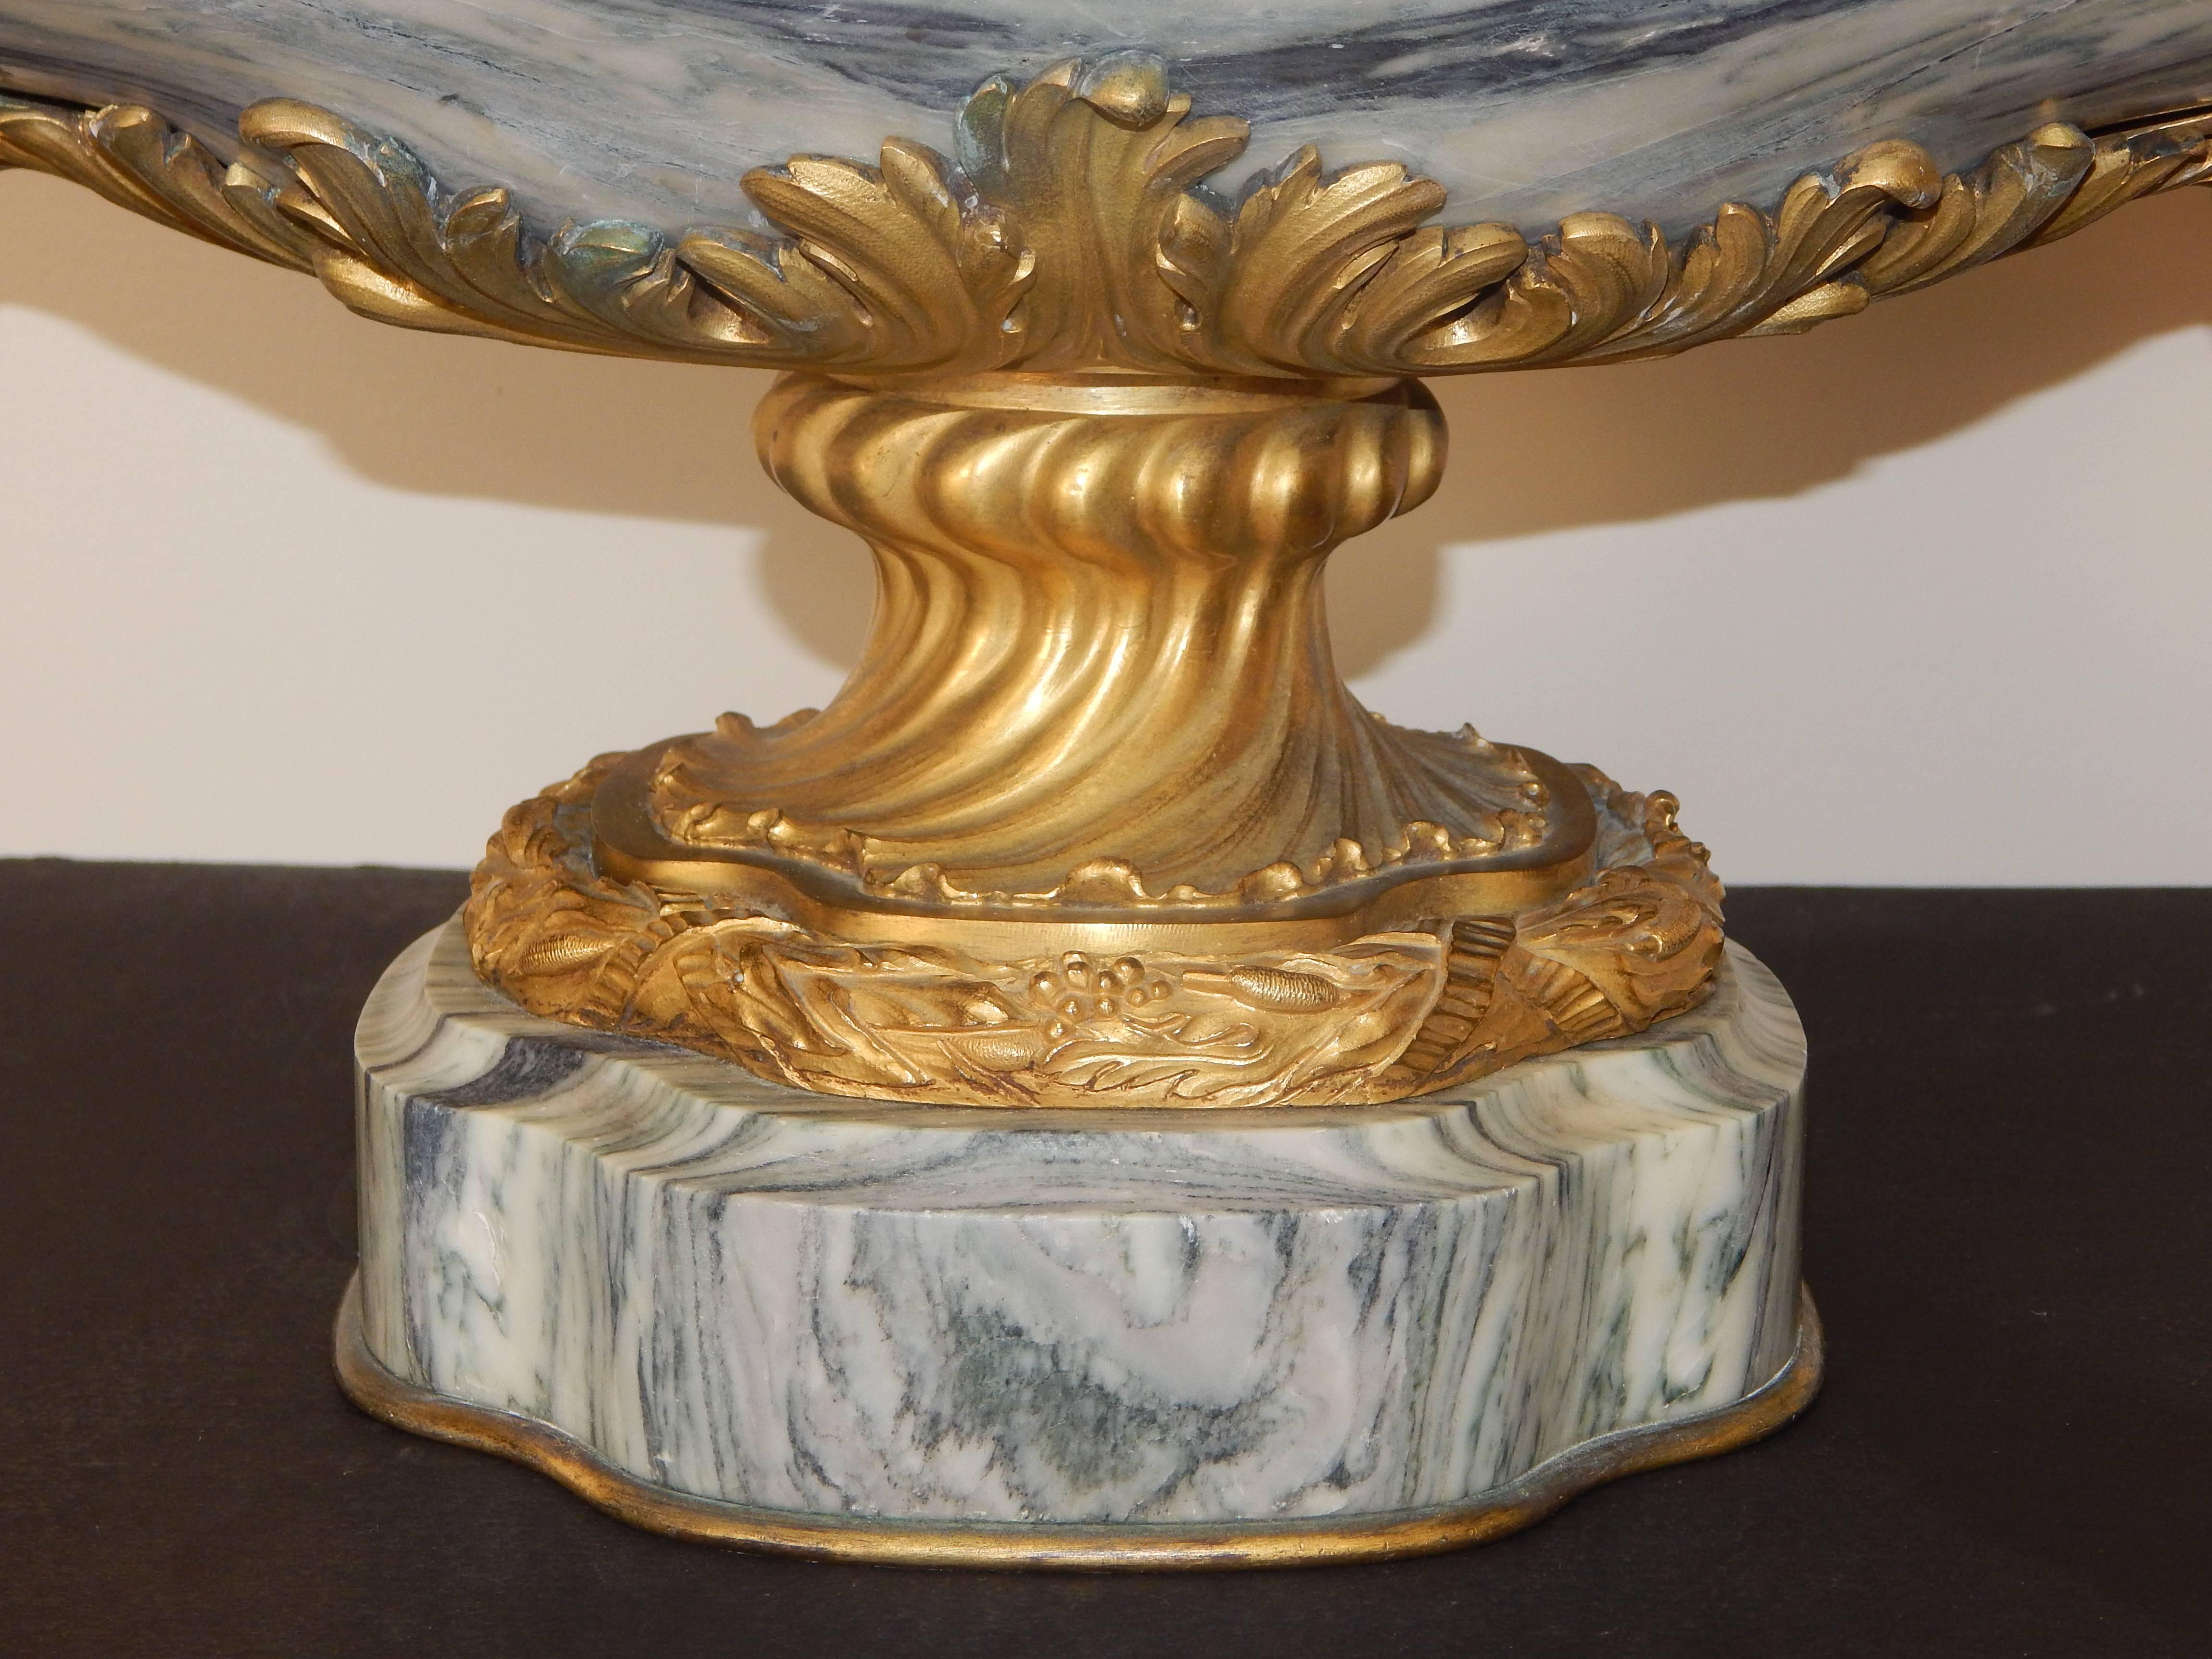 Exquisite Bronze Mounted Marble Centerpiece with Swans For Sale 1